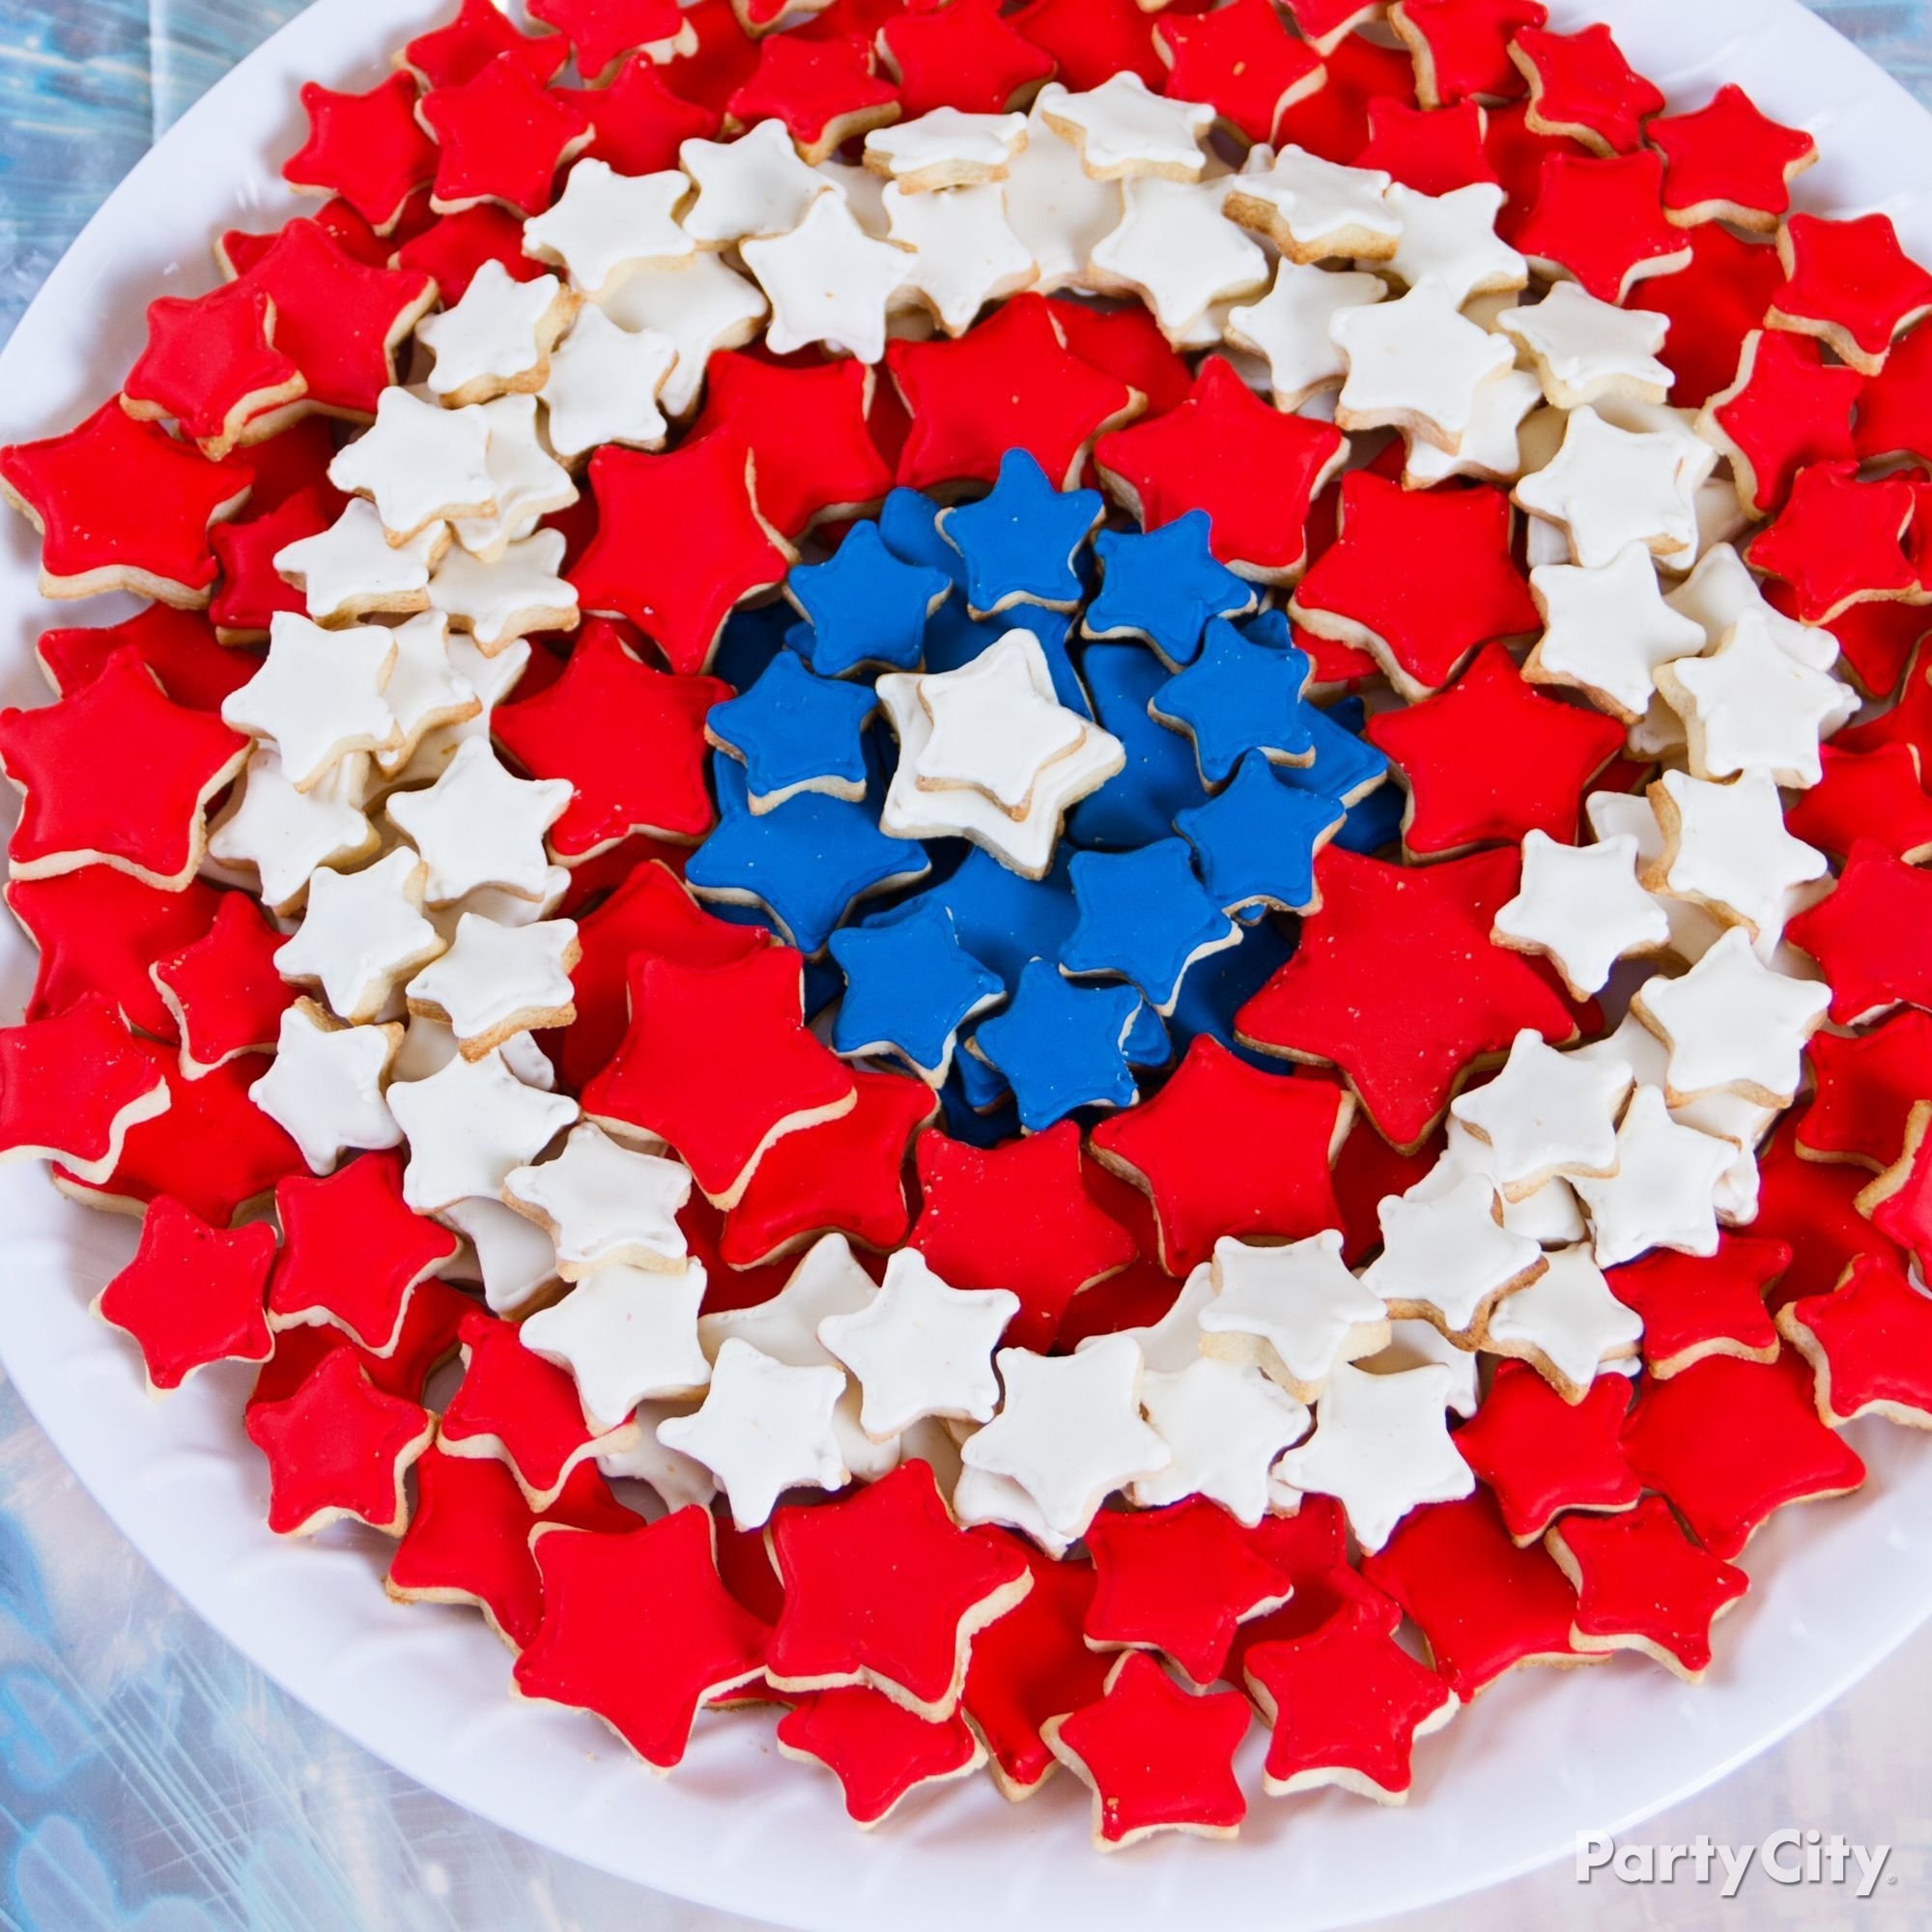 Avengers Captain America Shield Made of Cookies